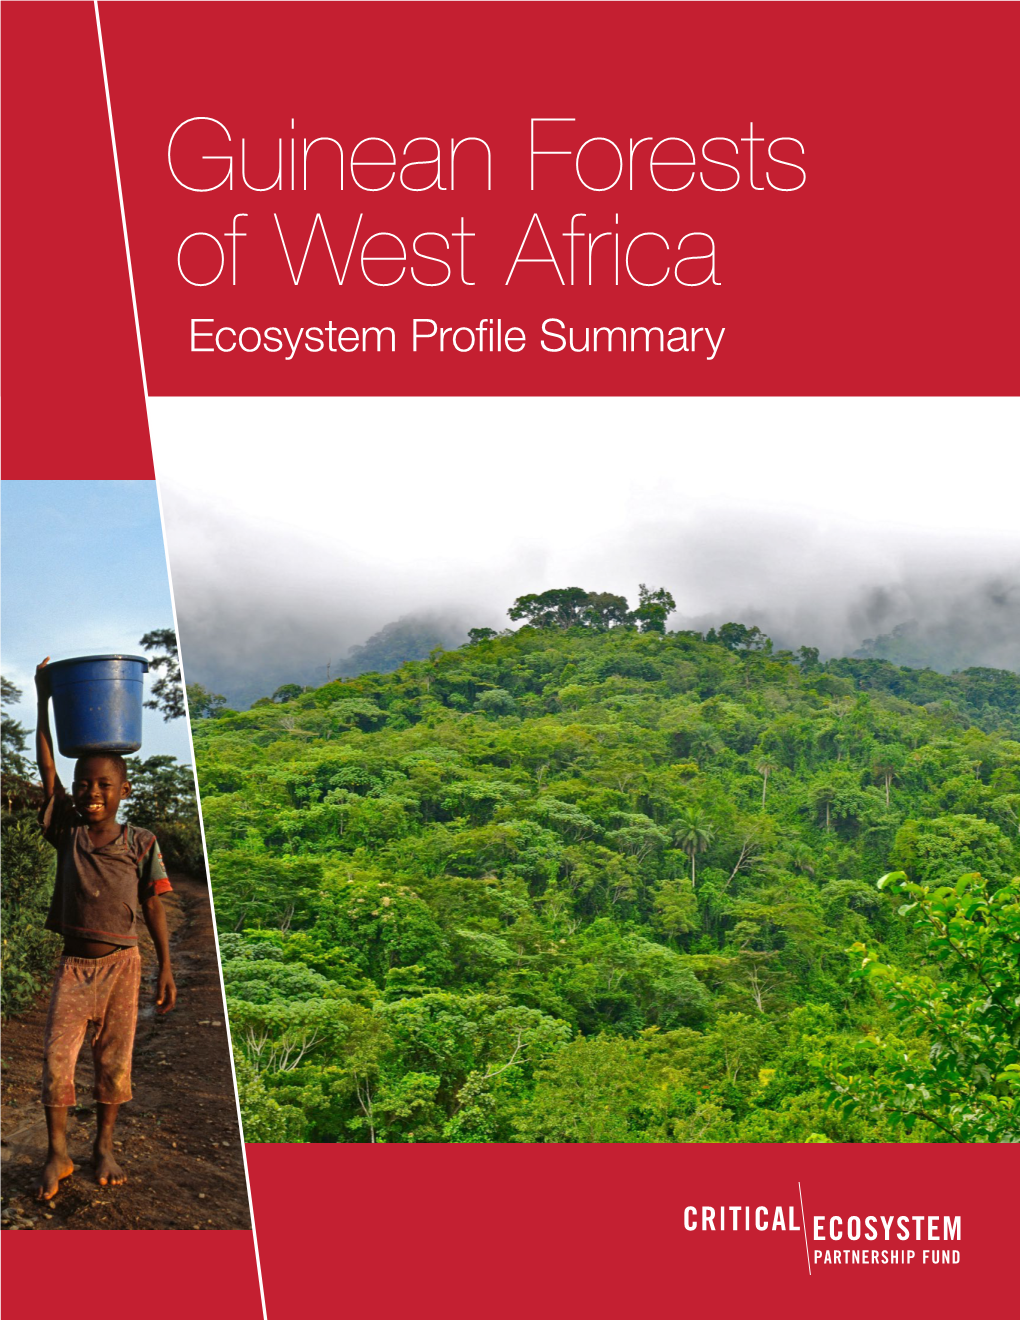 Guinean Forests of West Africa Ecosystem Profile Summary